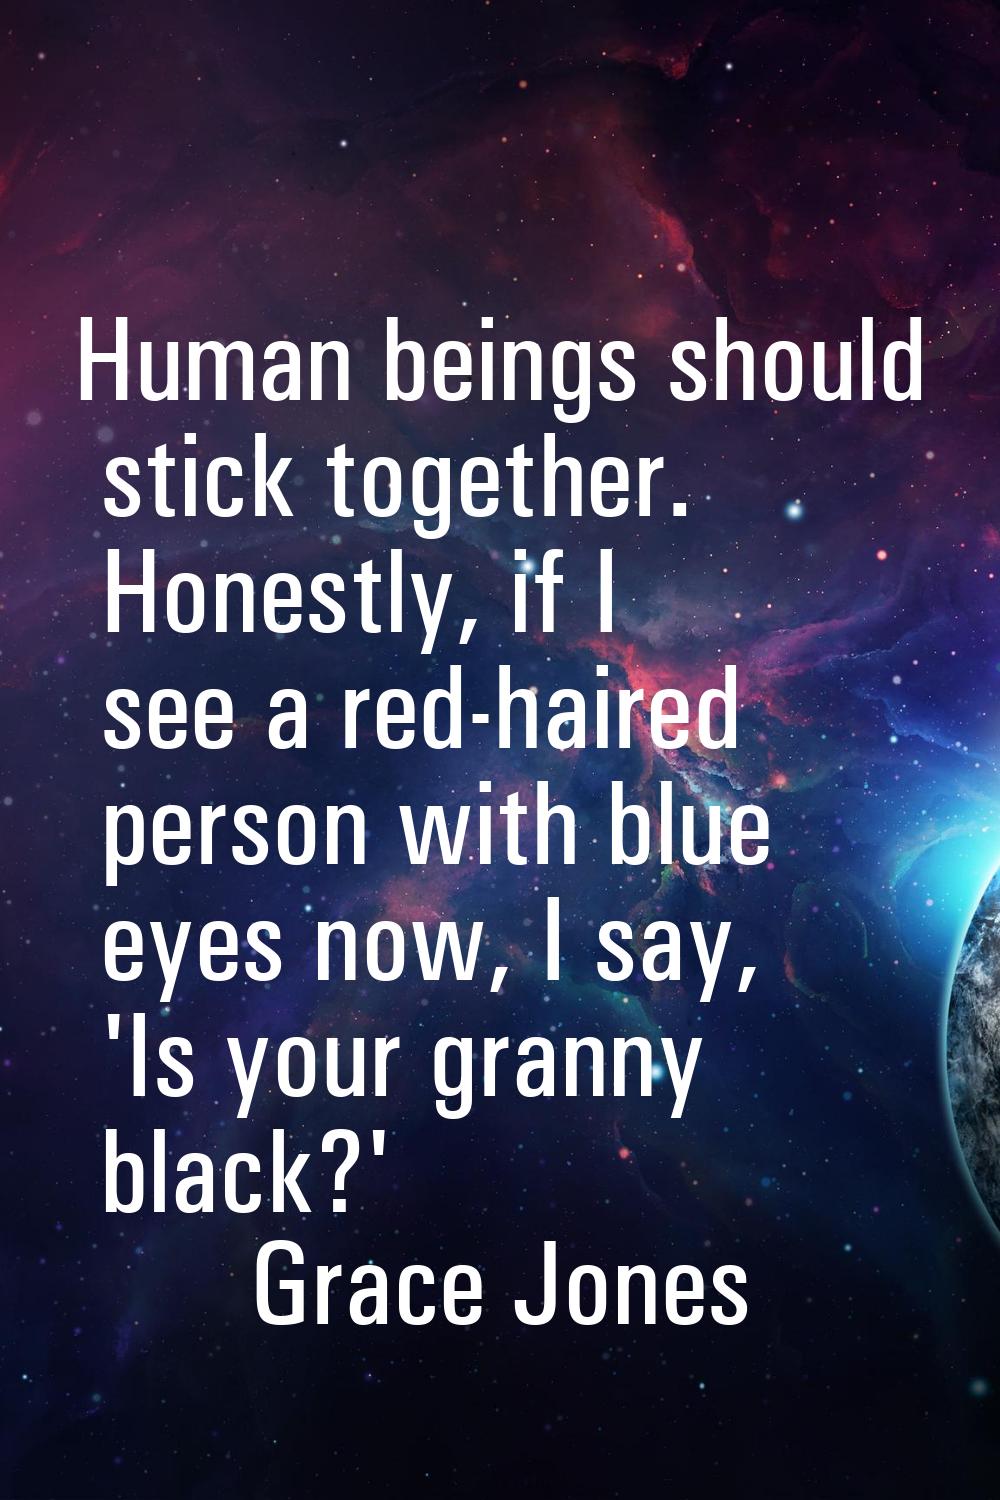 Human beings should stick together. Honestly, if I see a red-haired person with blue eyes now, I sa